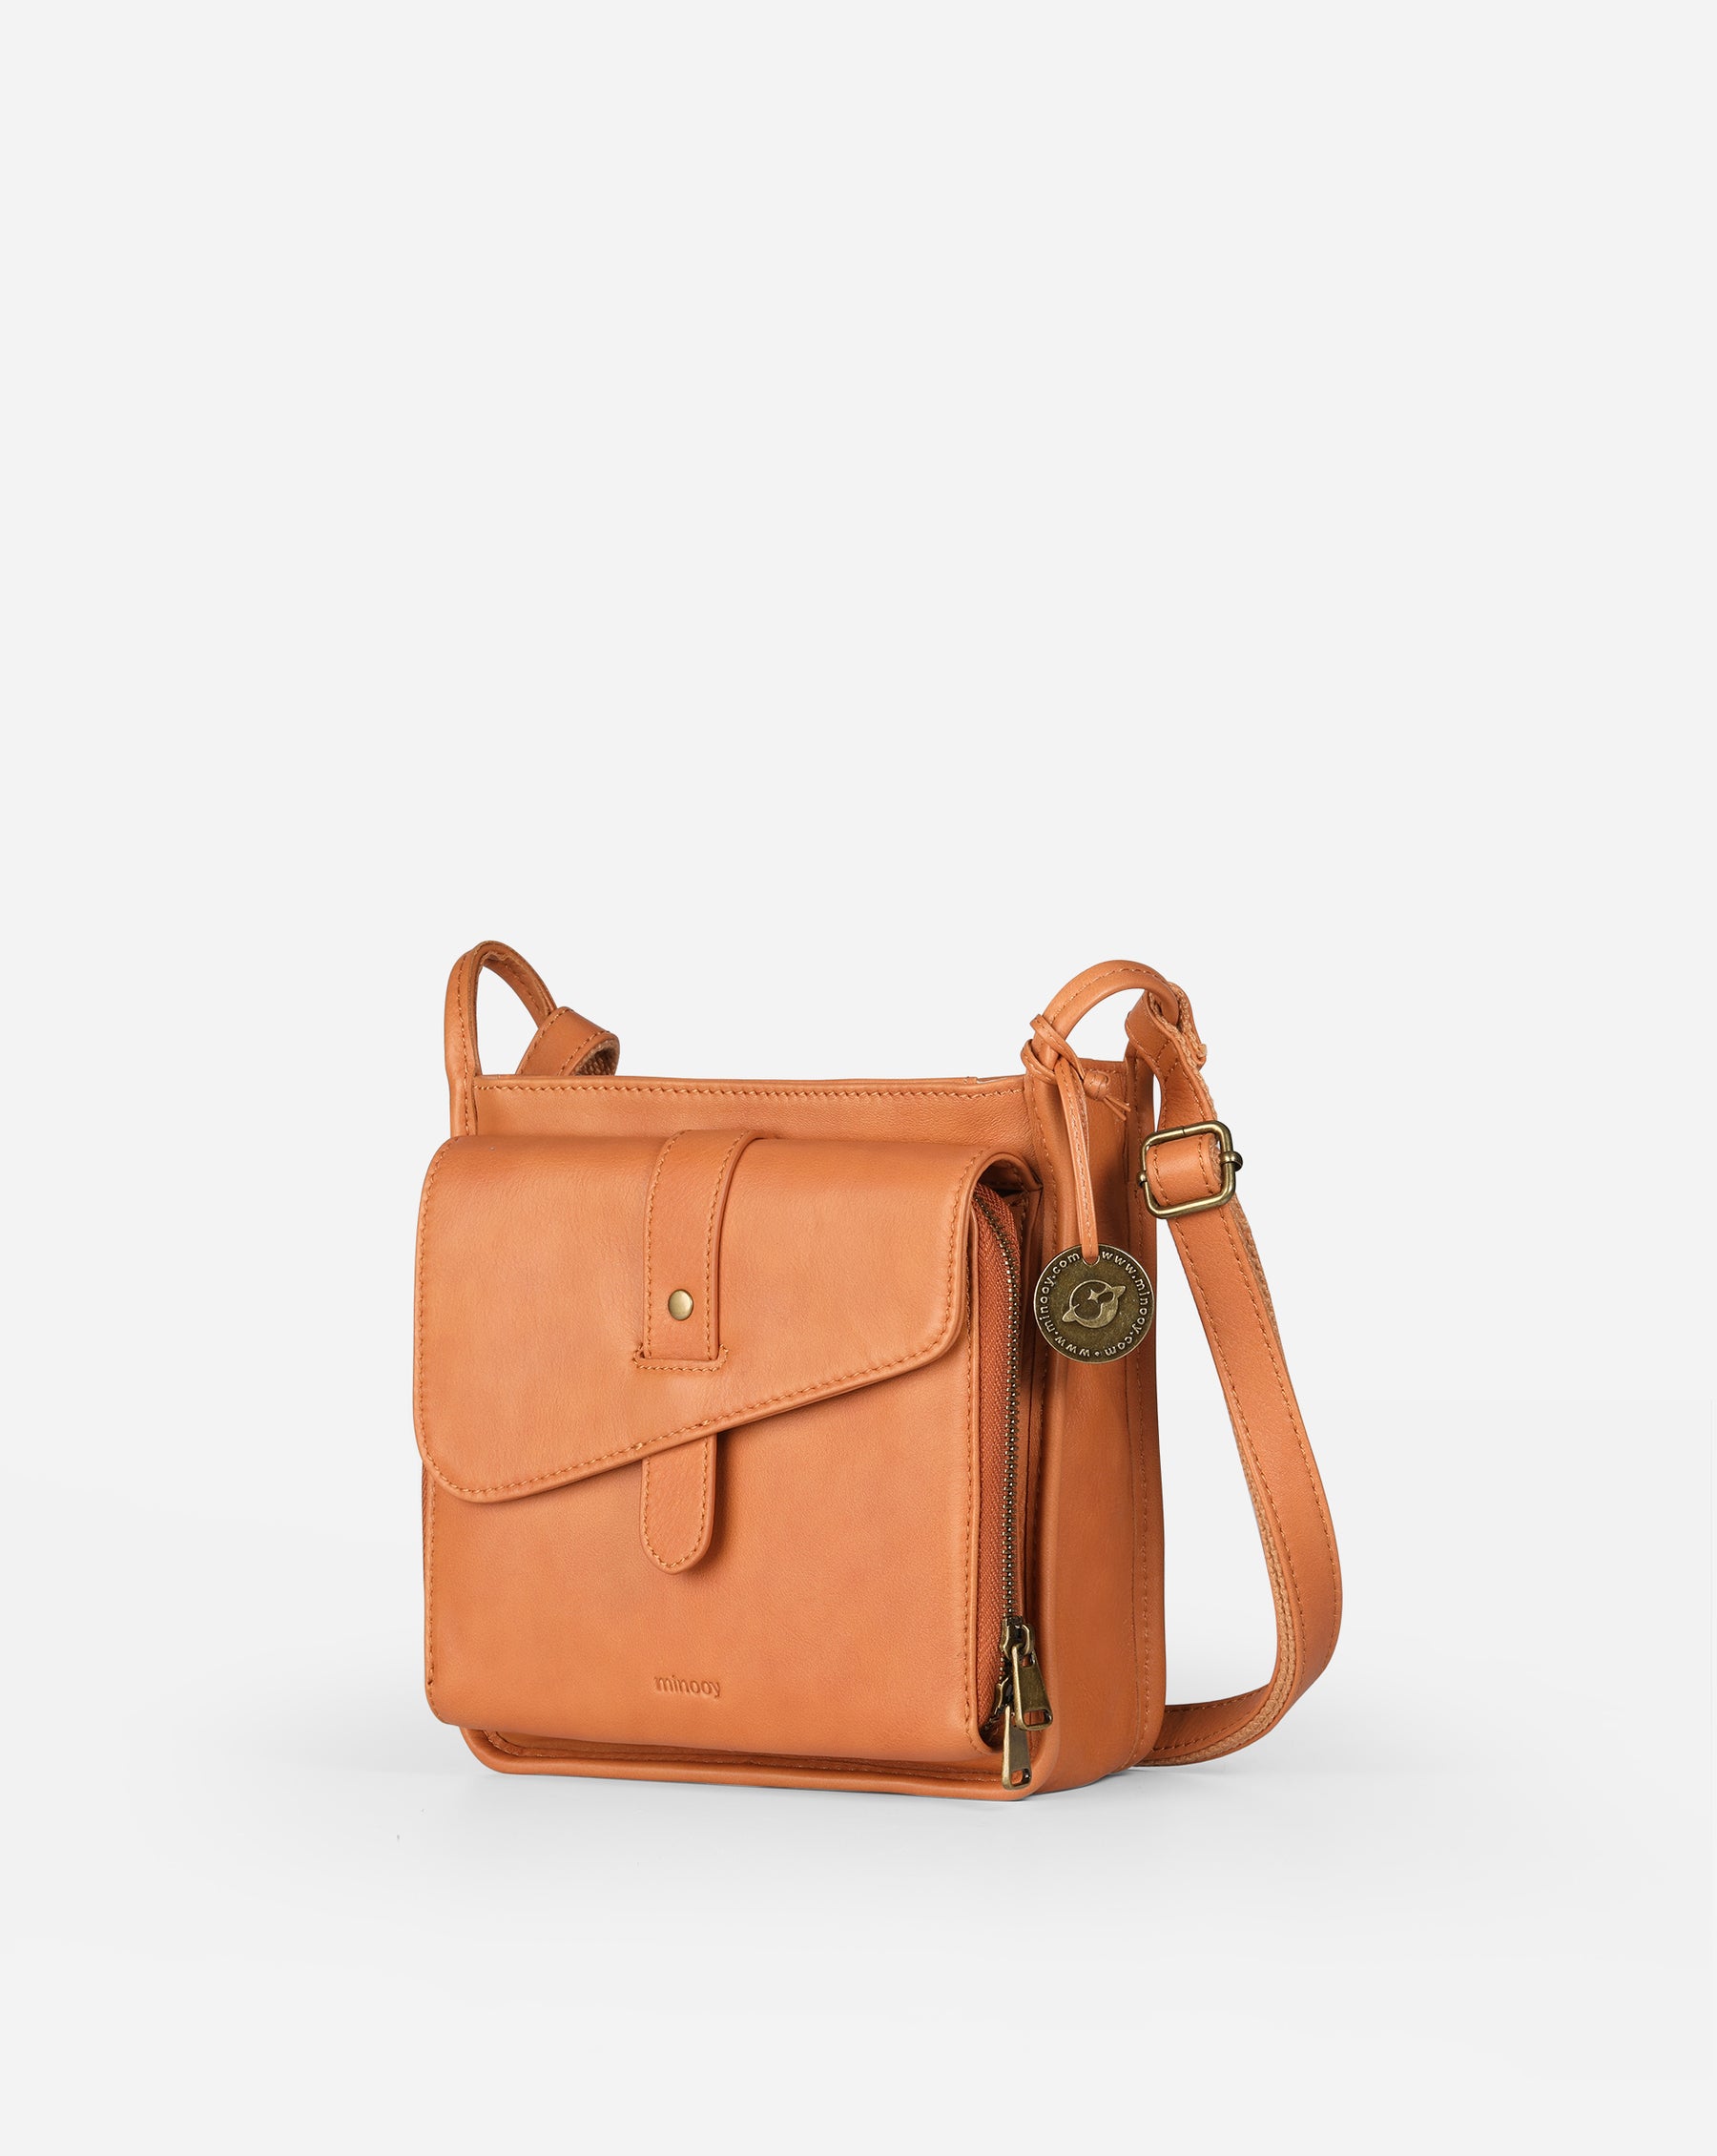 Stylish Tan Leather Crossbody Purse with Built-in Wallet